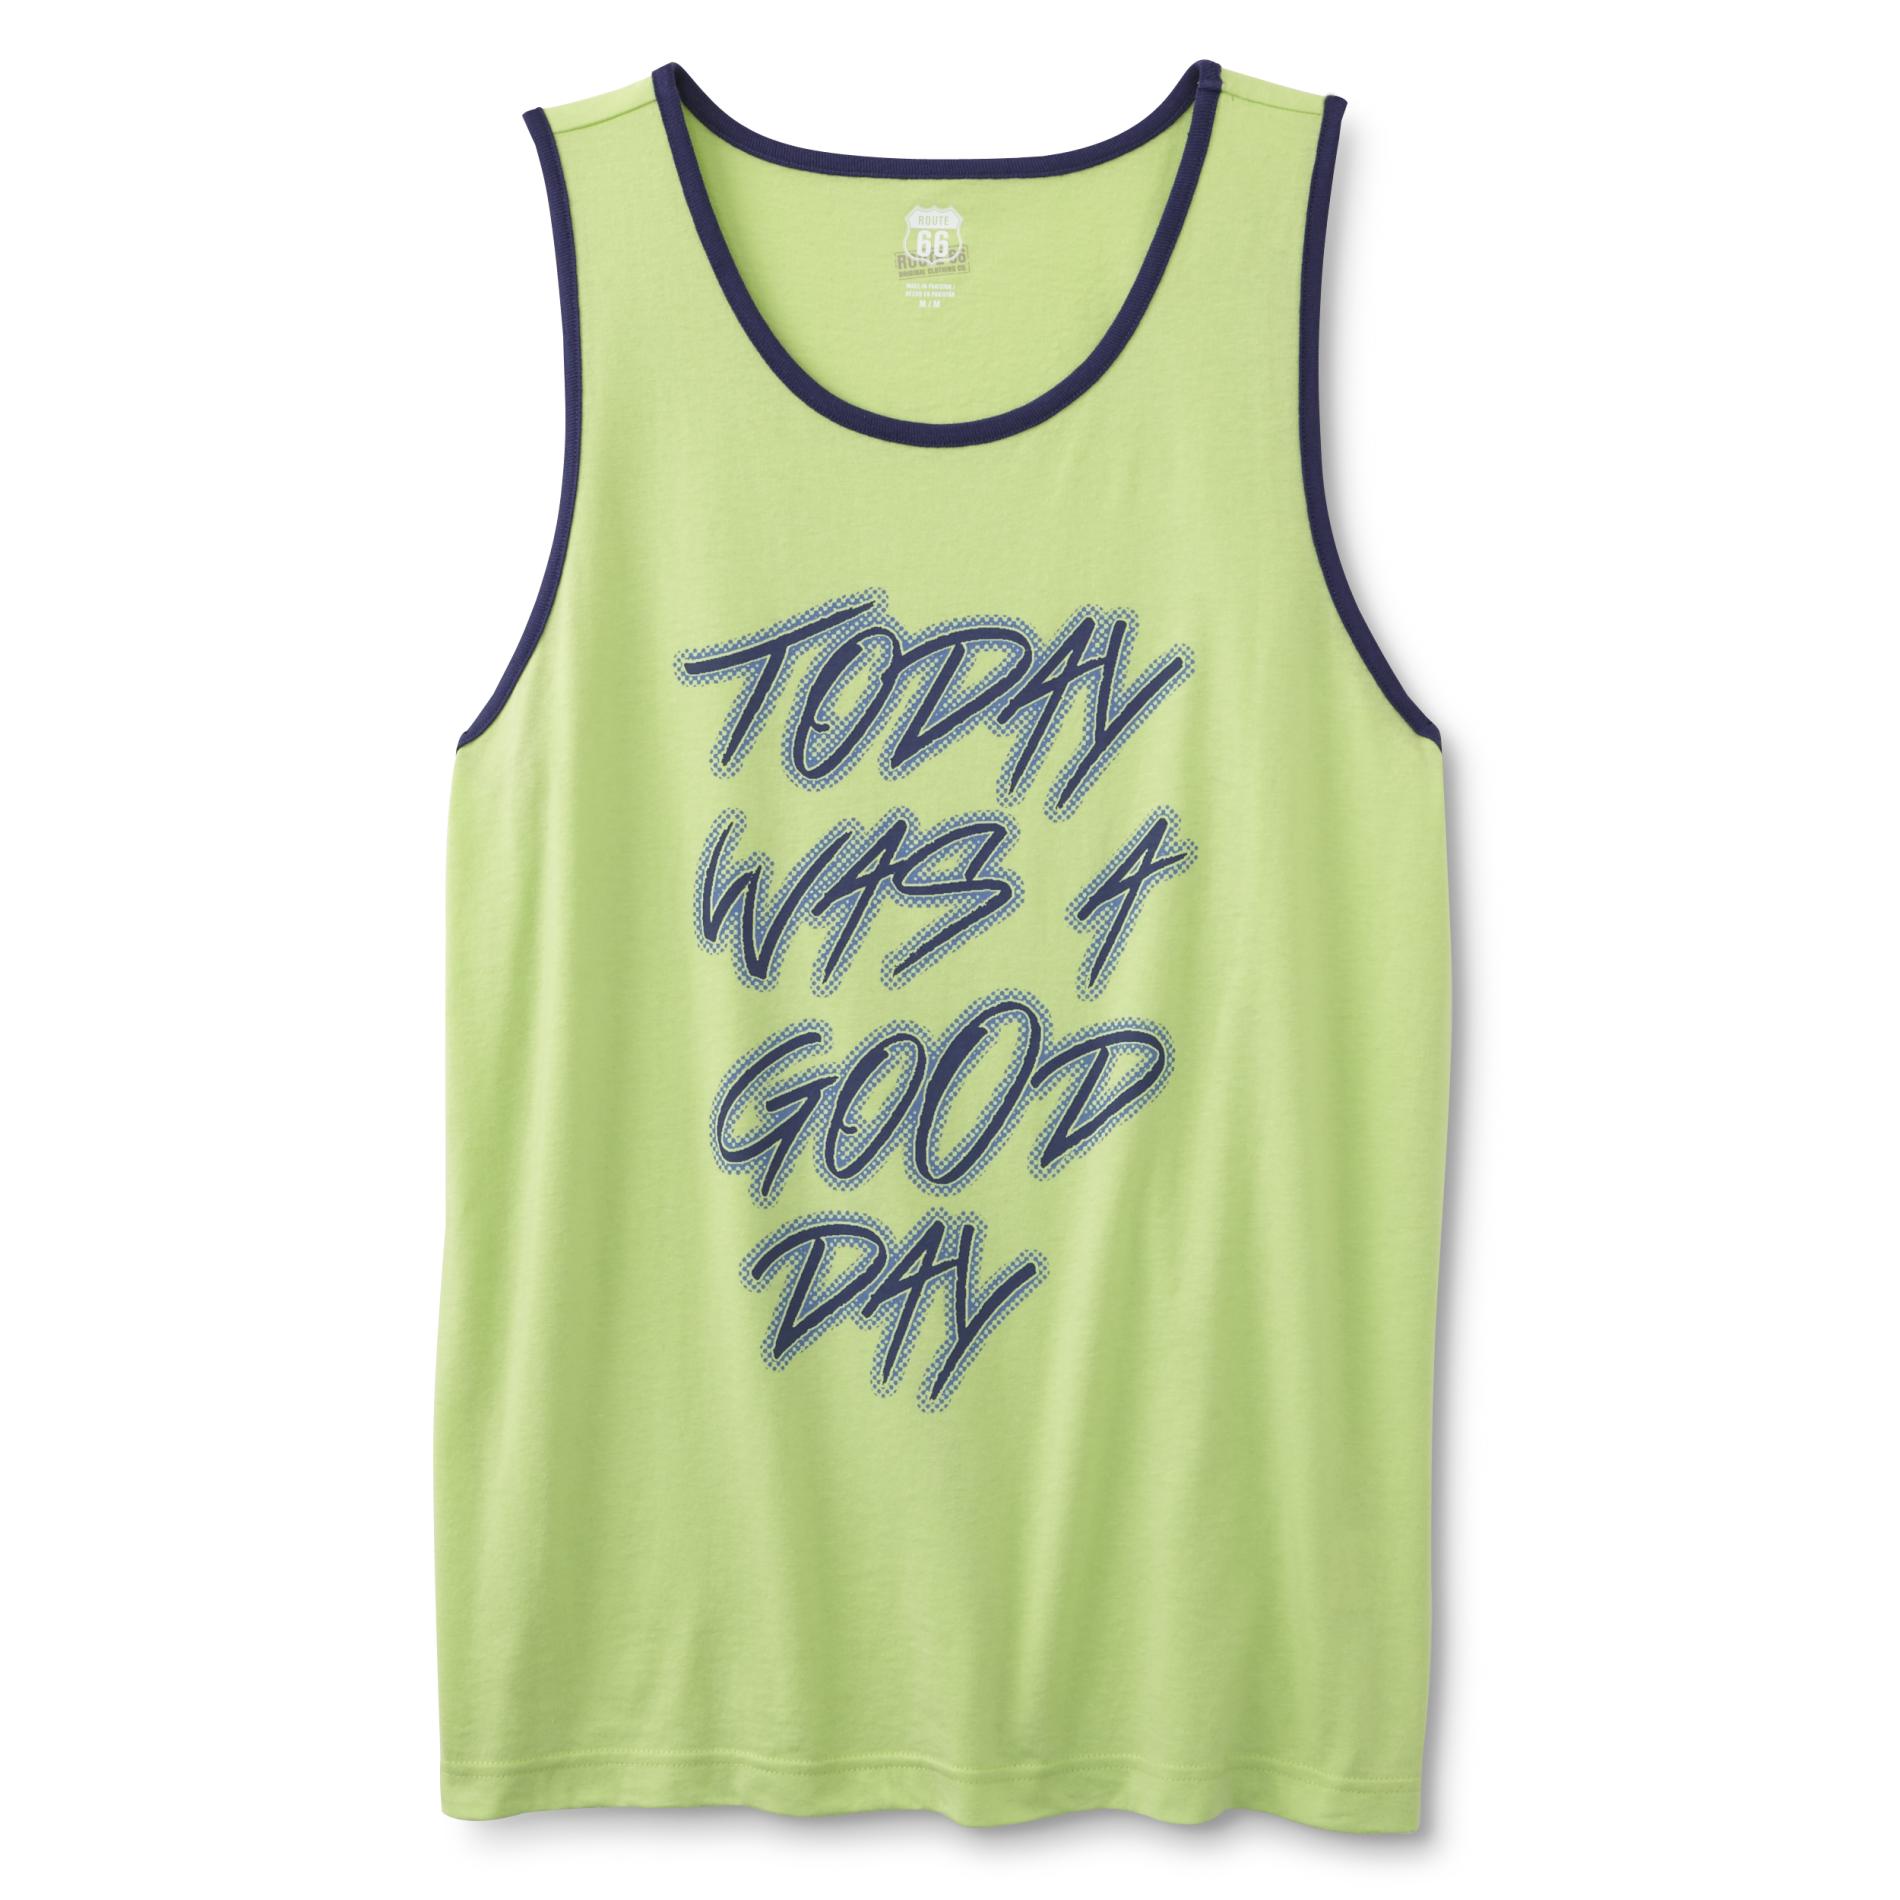 Route 66 Men's Graphic Tank Top - Today Was A Good Day